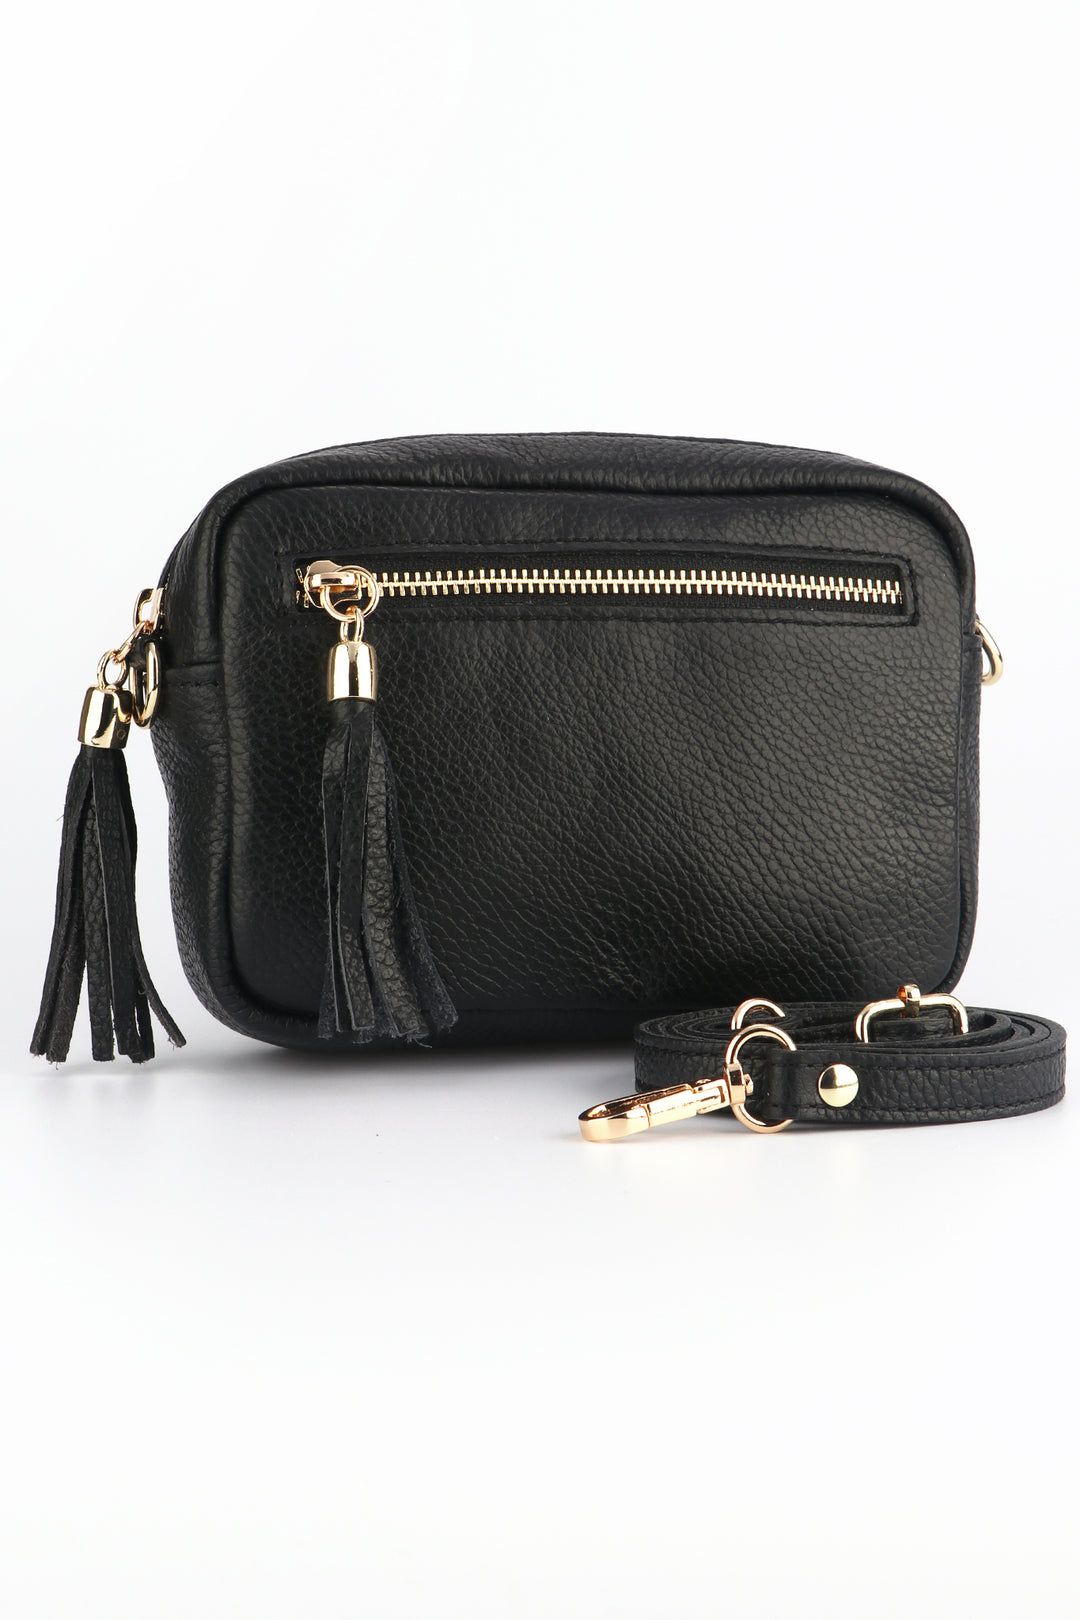 black leather crossbody camera bag with two zip closure compartment's and tassels